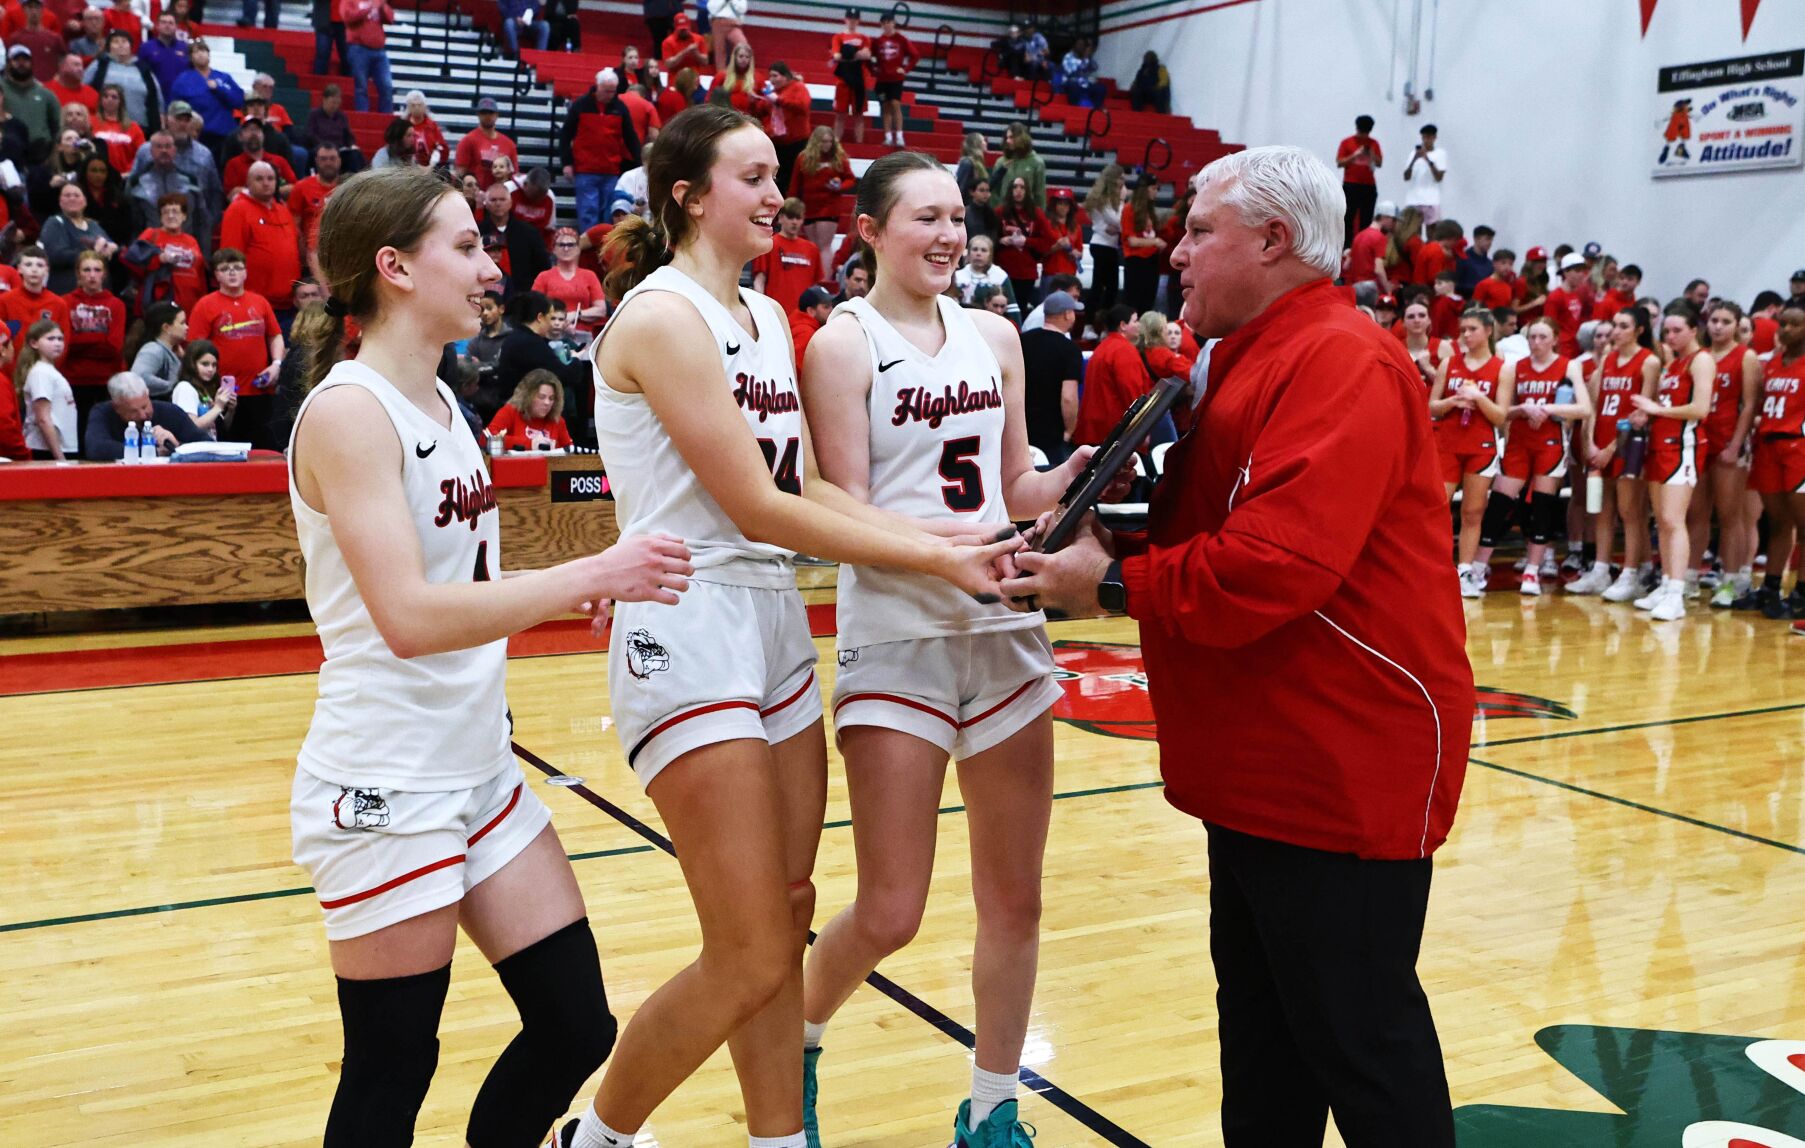 Highland High Girls Basketball Triumphs with Team Effort in Sectional Crown Victory